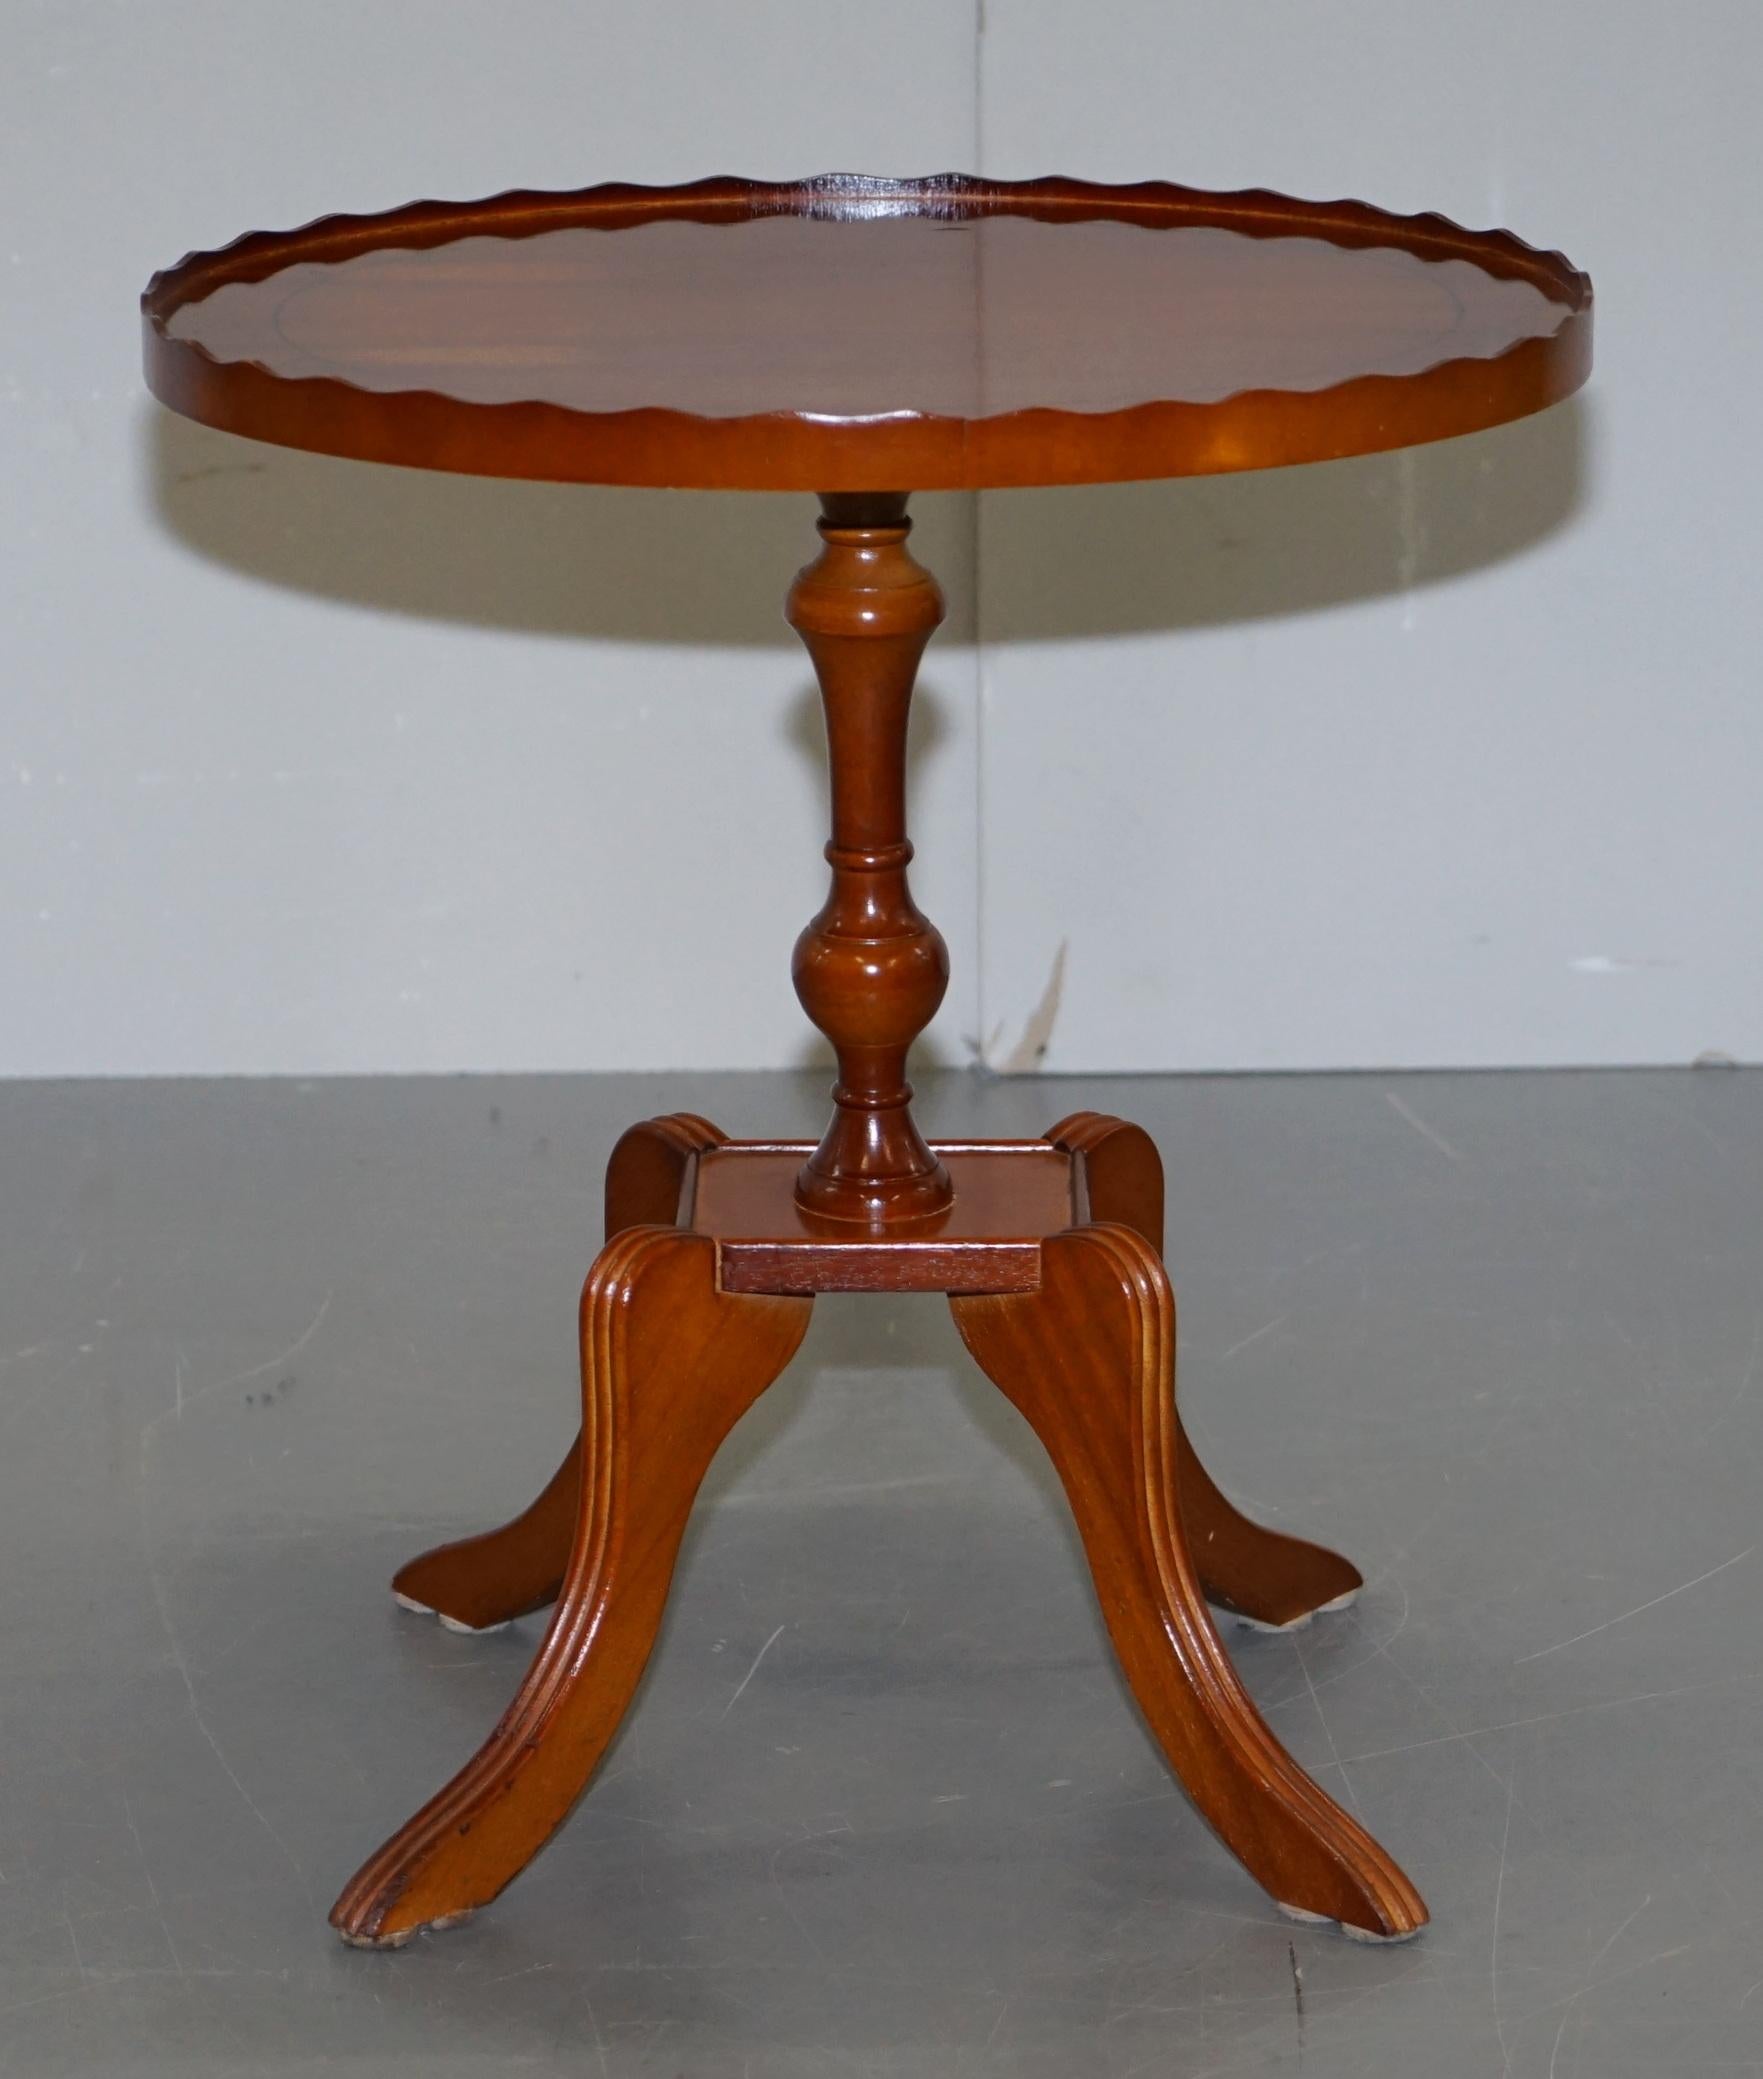 Sublime Burr Yew Wood Beresford & Hicks Side End Lamp Table with Gallery Rail For Sale 7